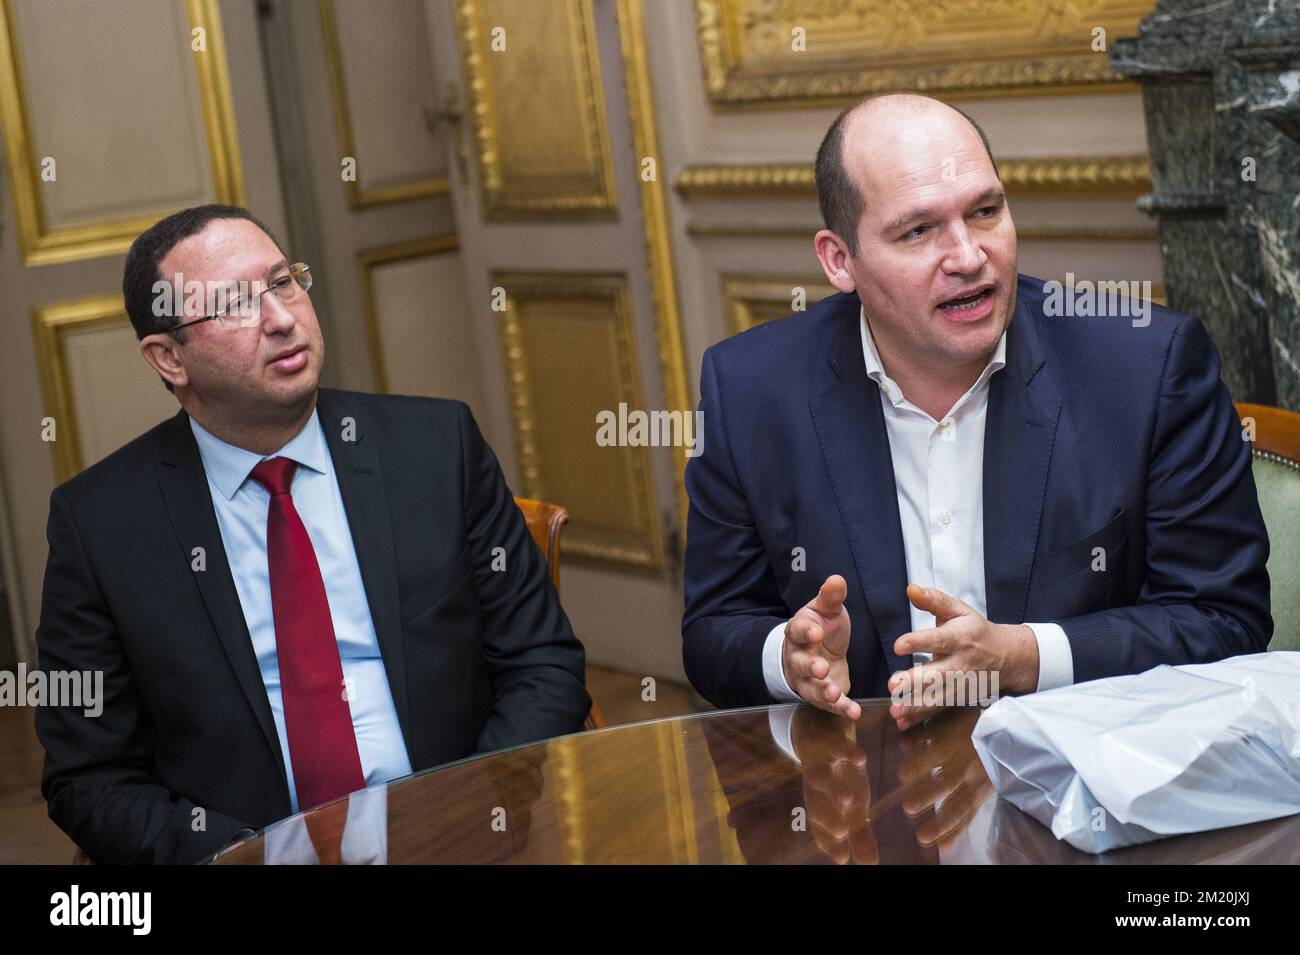 20151216 - BRUSSELS, BELGIUM: Kais Sellami and Brussels alderman Philippe Close pictured during a press conference to honour of 2015 Peace Nobel Price winners, Tunisian National Dialouge Quartet members, in Brussels city hall, Wednesday 16 December 2015. BELGA PHOTO LAURIE DIEFFEMBACQ Stock Photo